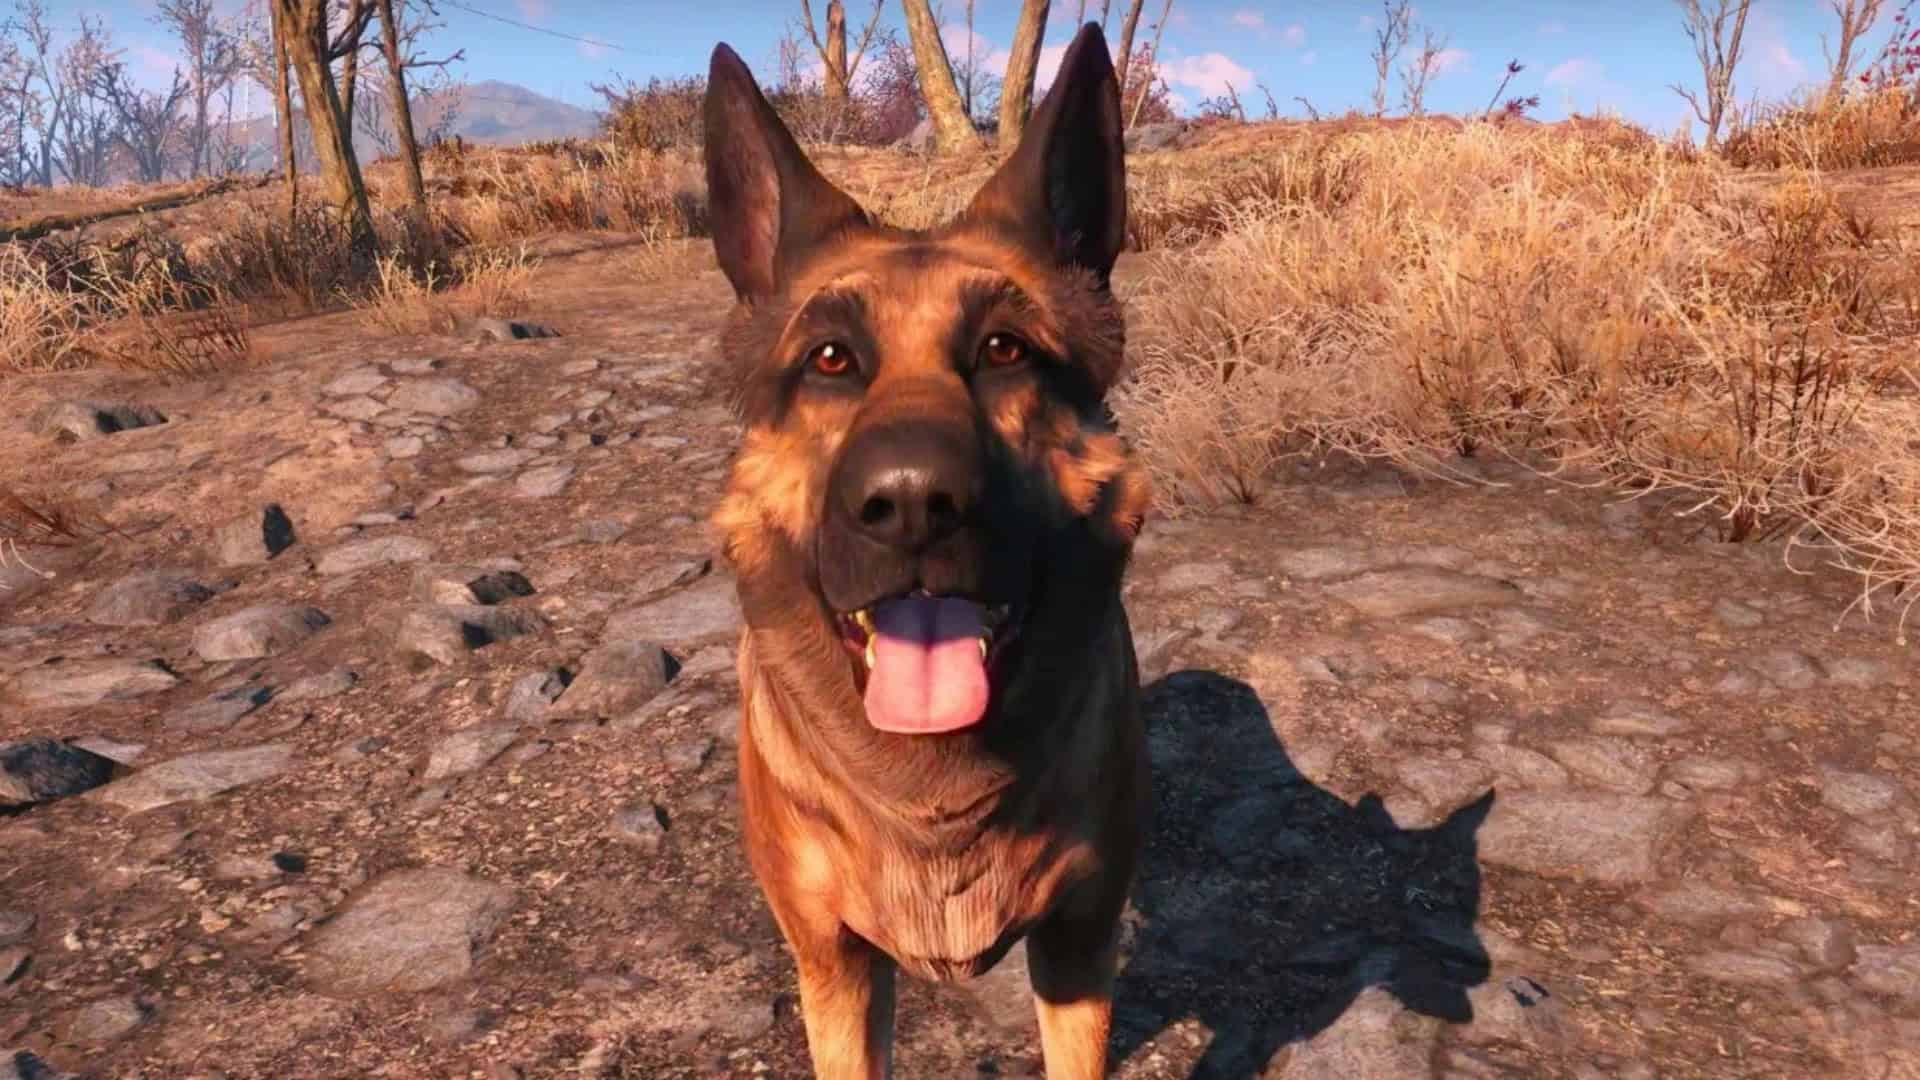 Fallout 4 best mods: A German Shepherd looks at the player in the game. Image via Nexus Mods.